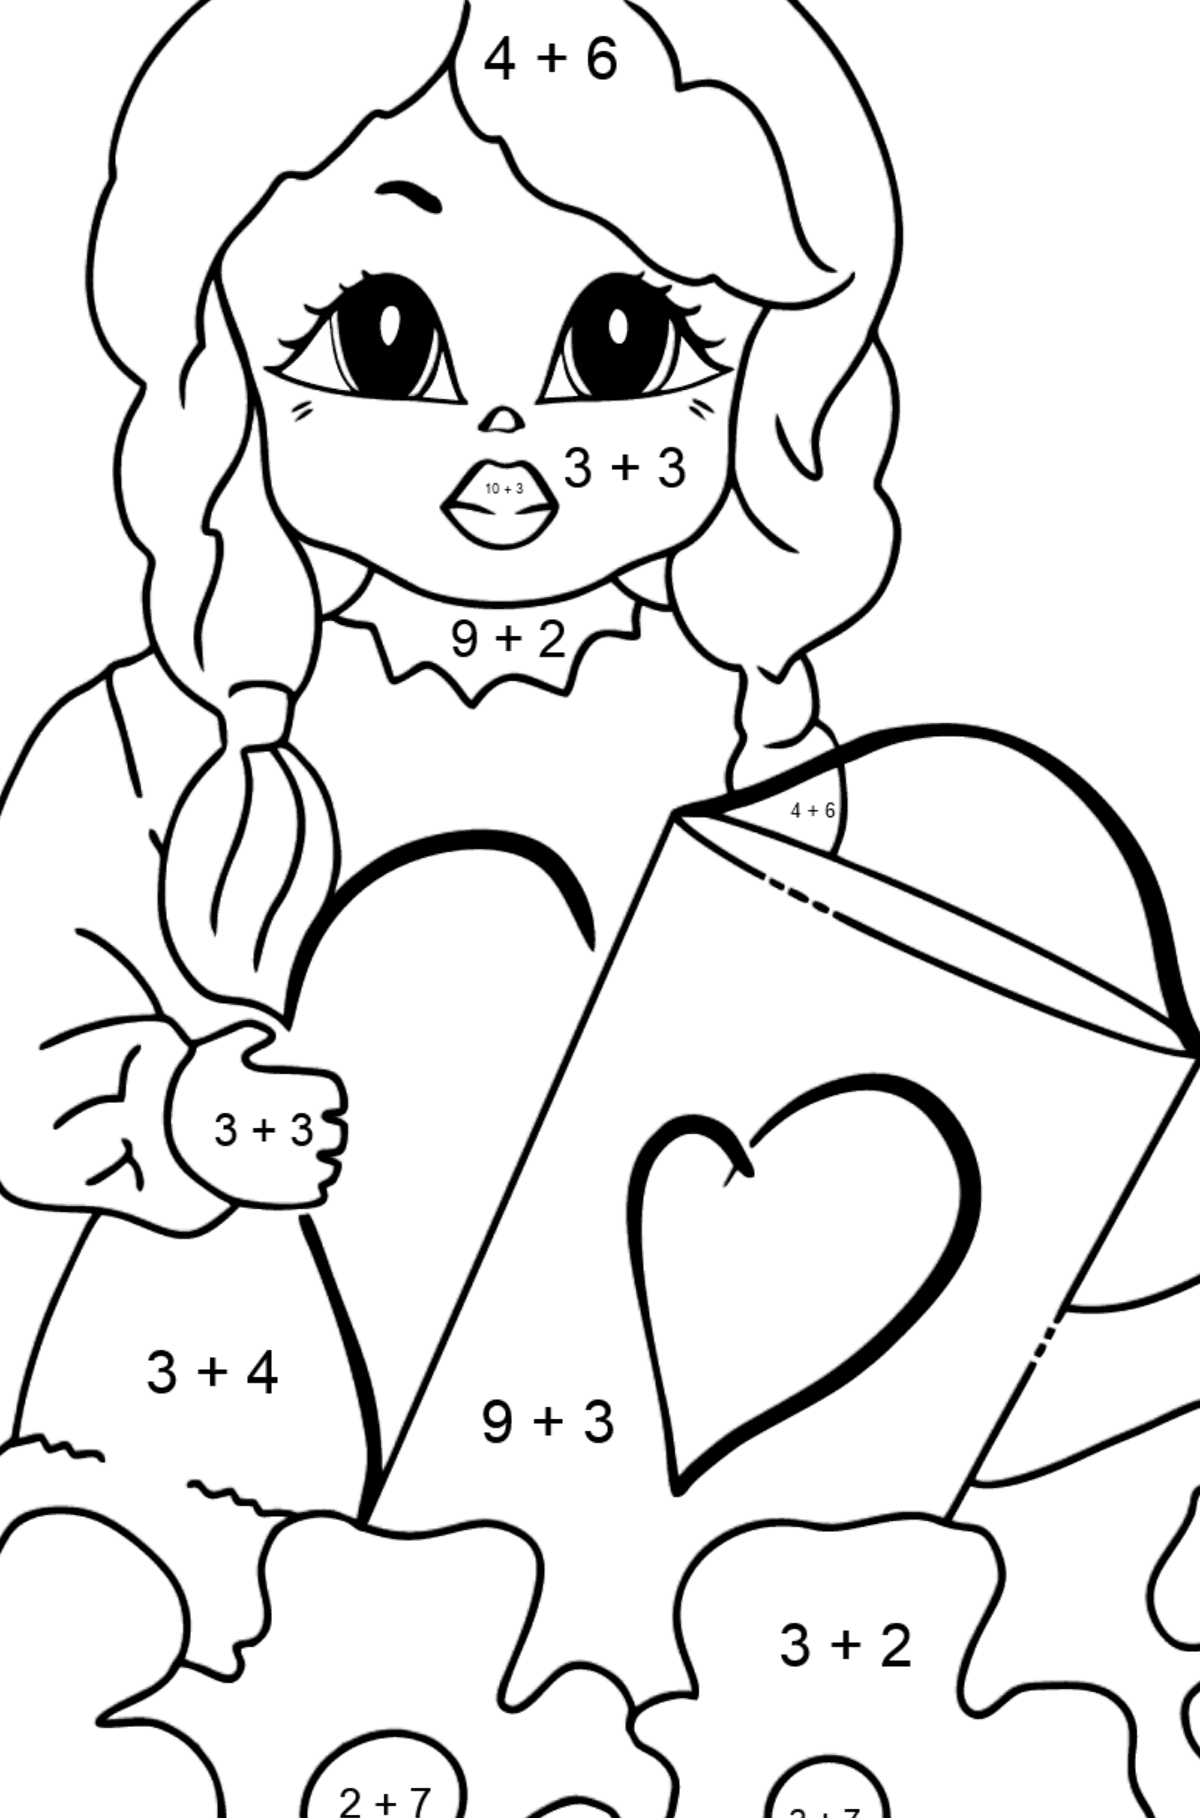 Coloring Picture - A Princess with a Watering Can - Math Coloring - Addition for Kids